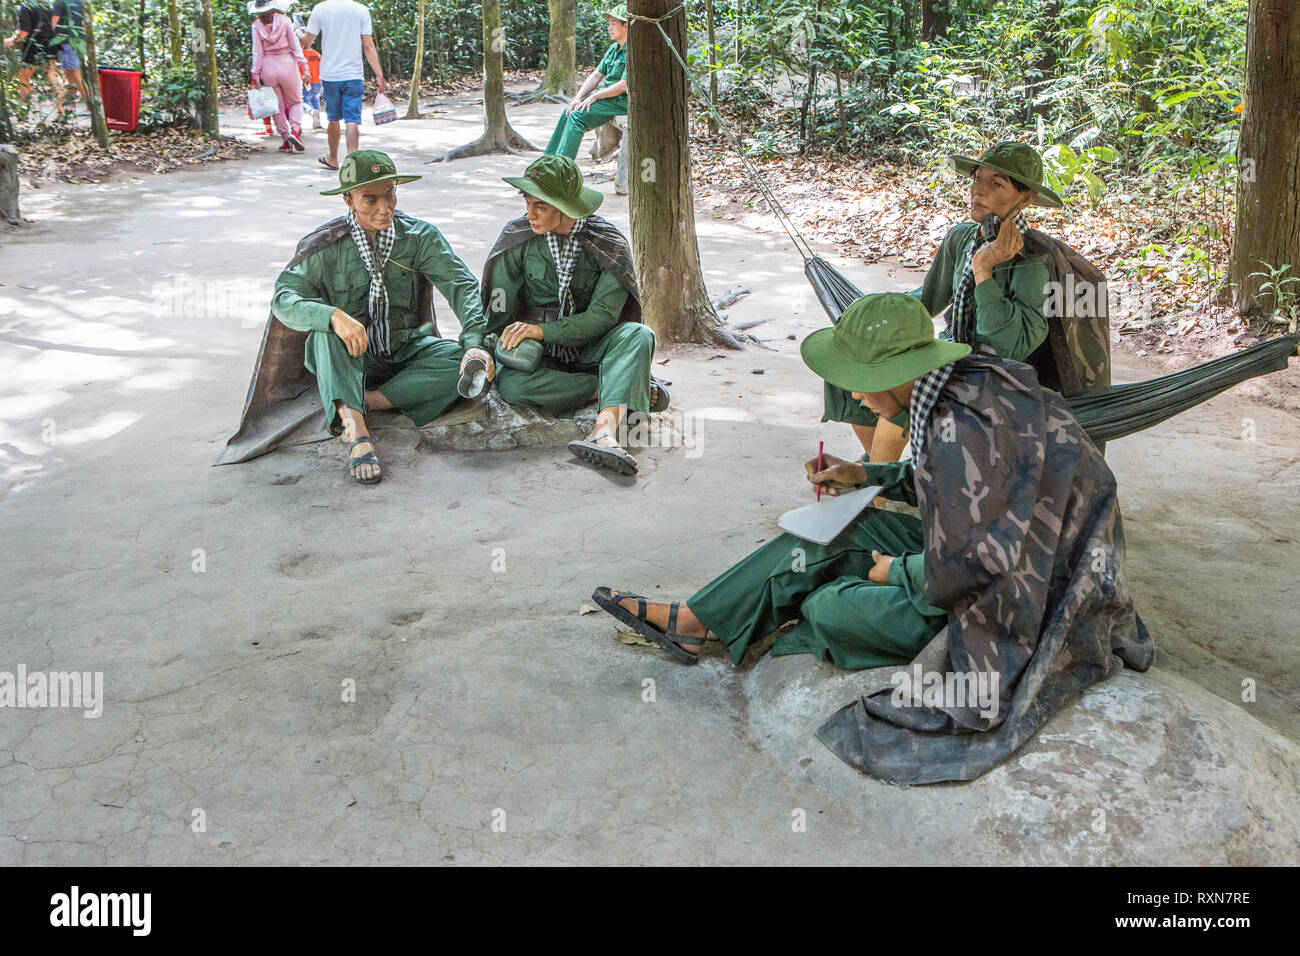 Models of Vietcong fighters at the Cu Chi Tunnels, Vietnam. Stock Photo